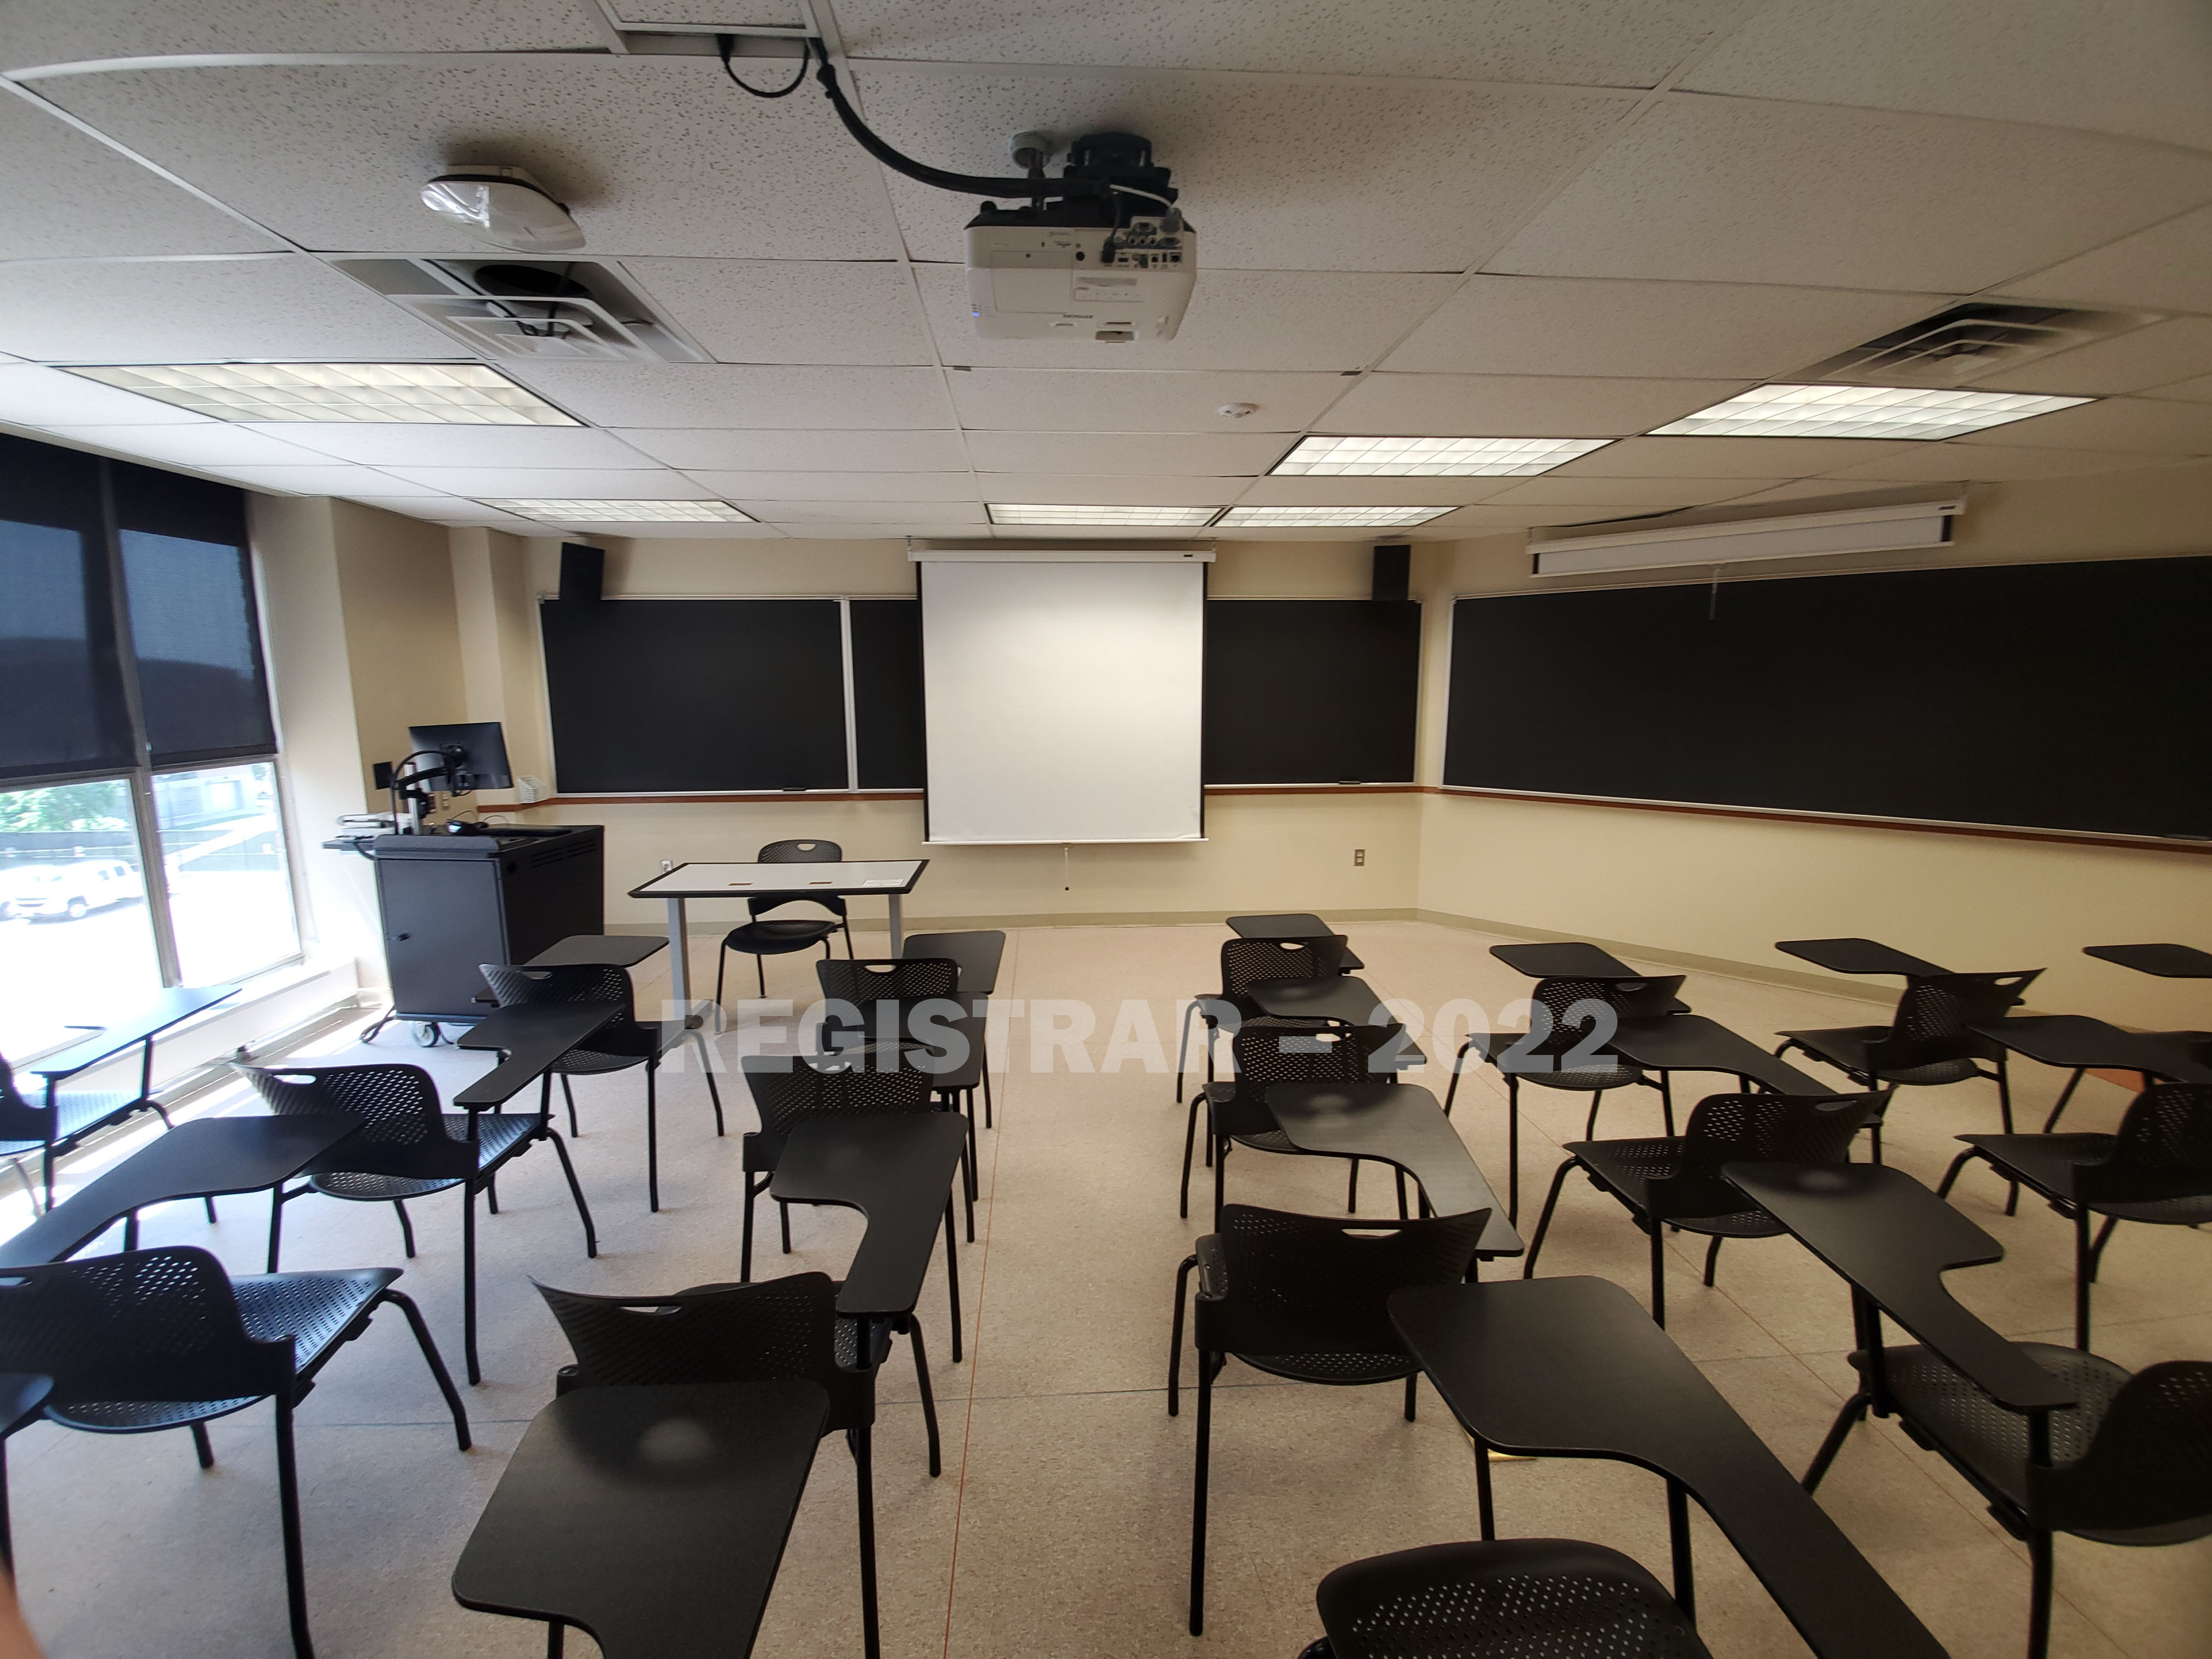 Enarson Classroom Building room 354 ultra wide angle view from the back of the room with projector screen down